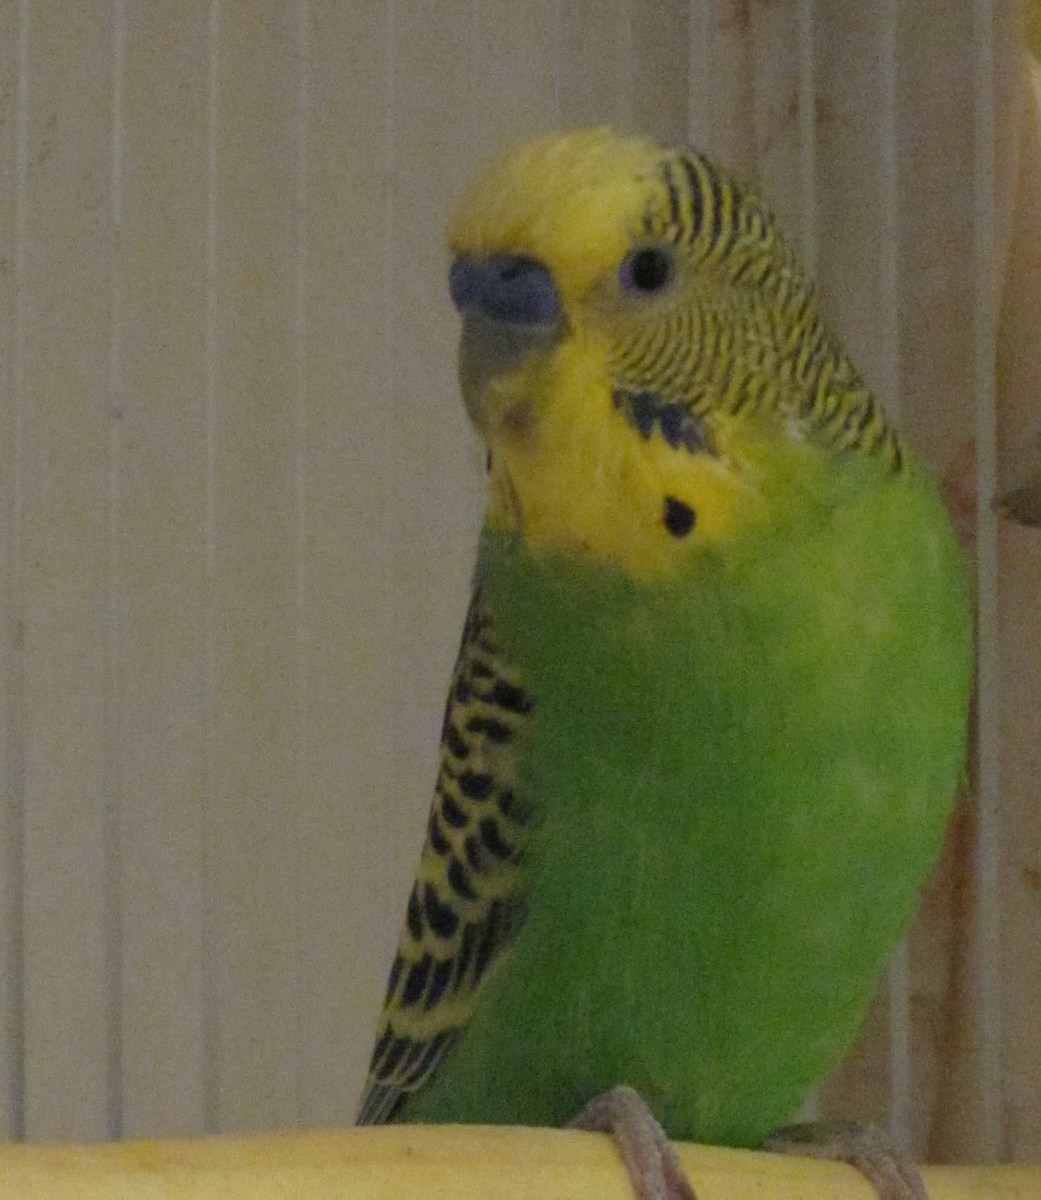 Tips for Caring for Your First Pet Budgie (Parakeet)